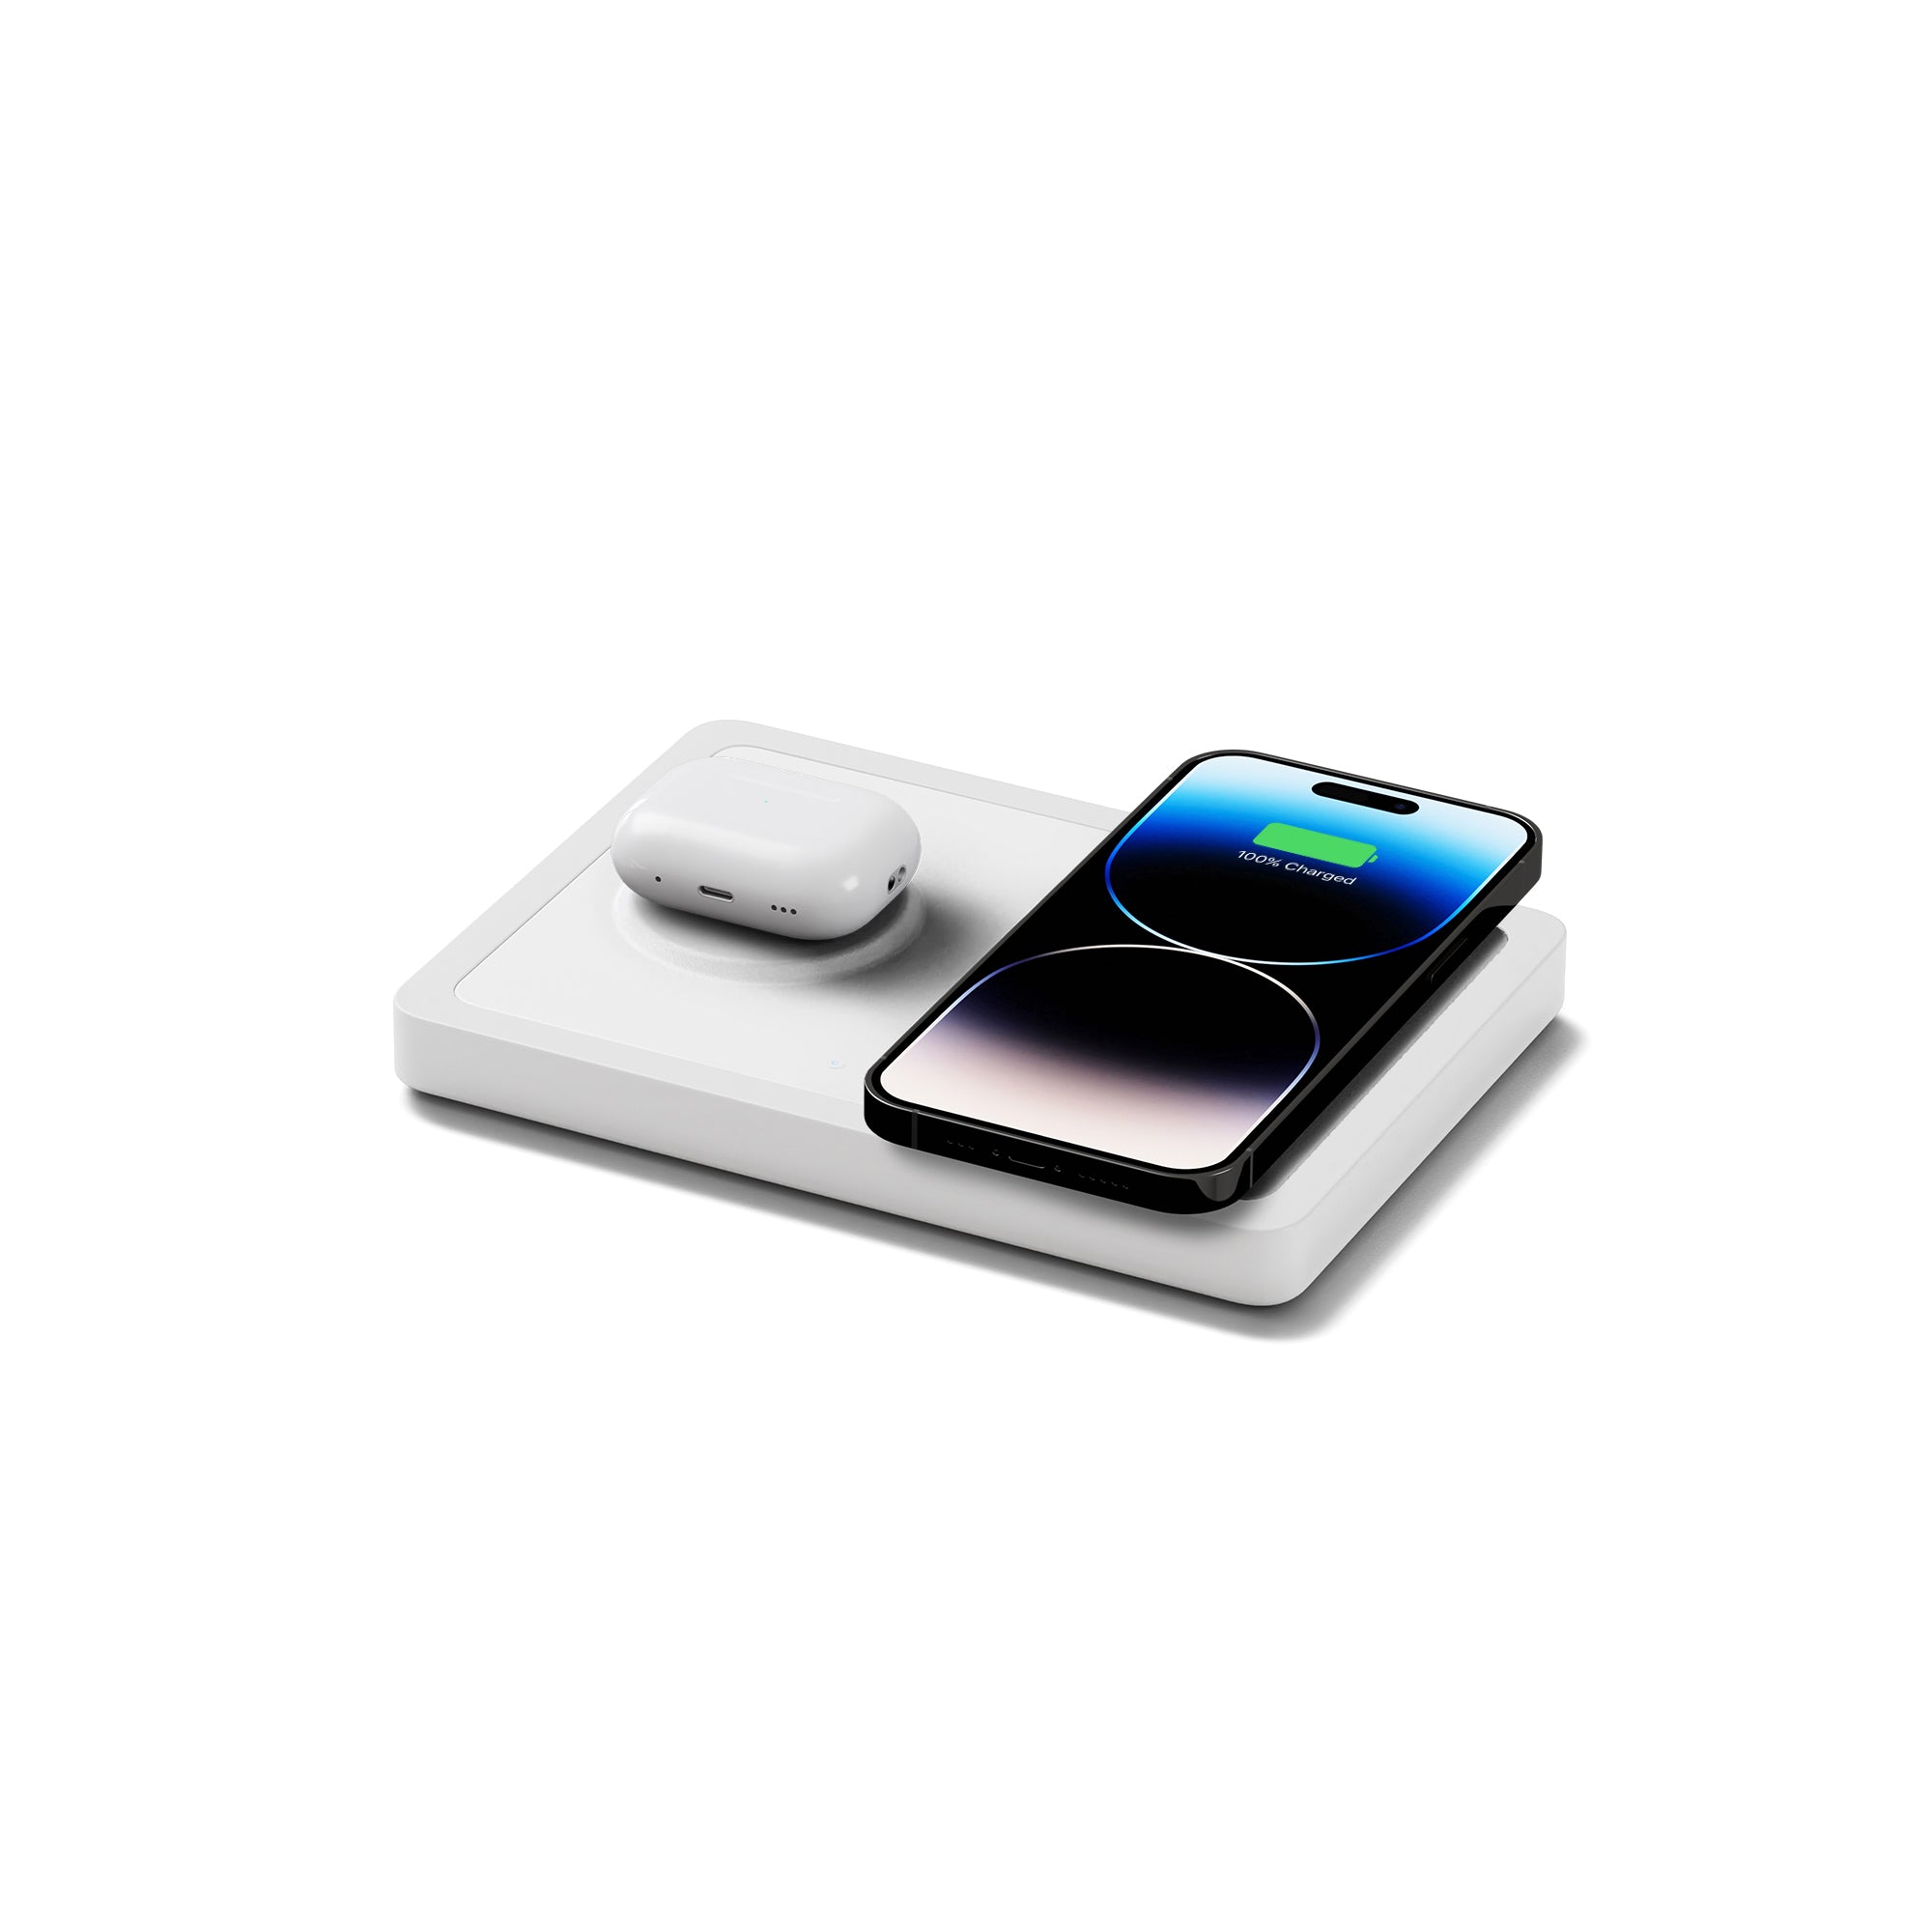 DUO White - 2-in-1 MagSafe Rustic White Wireless Charger with USB-C and A Ports Support angle view with devices